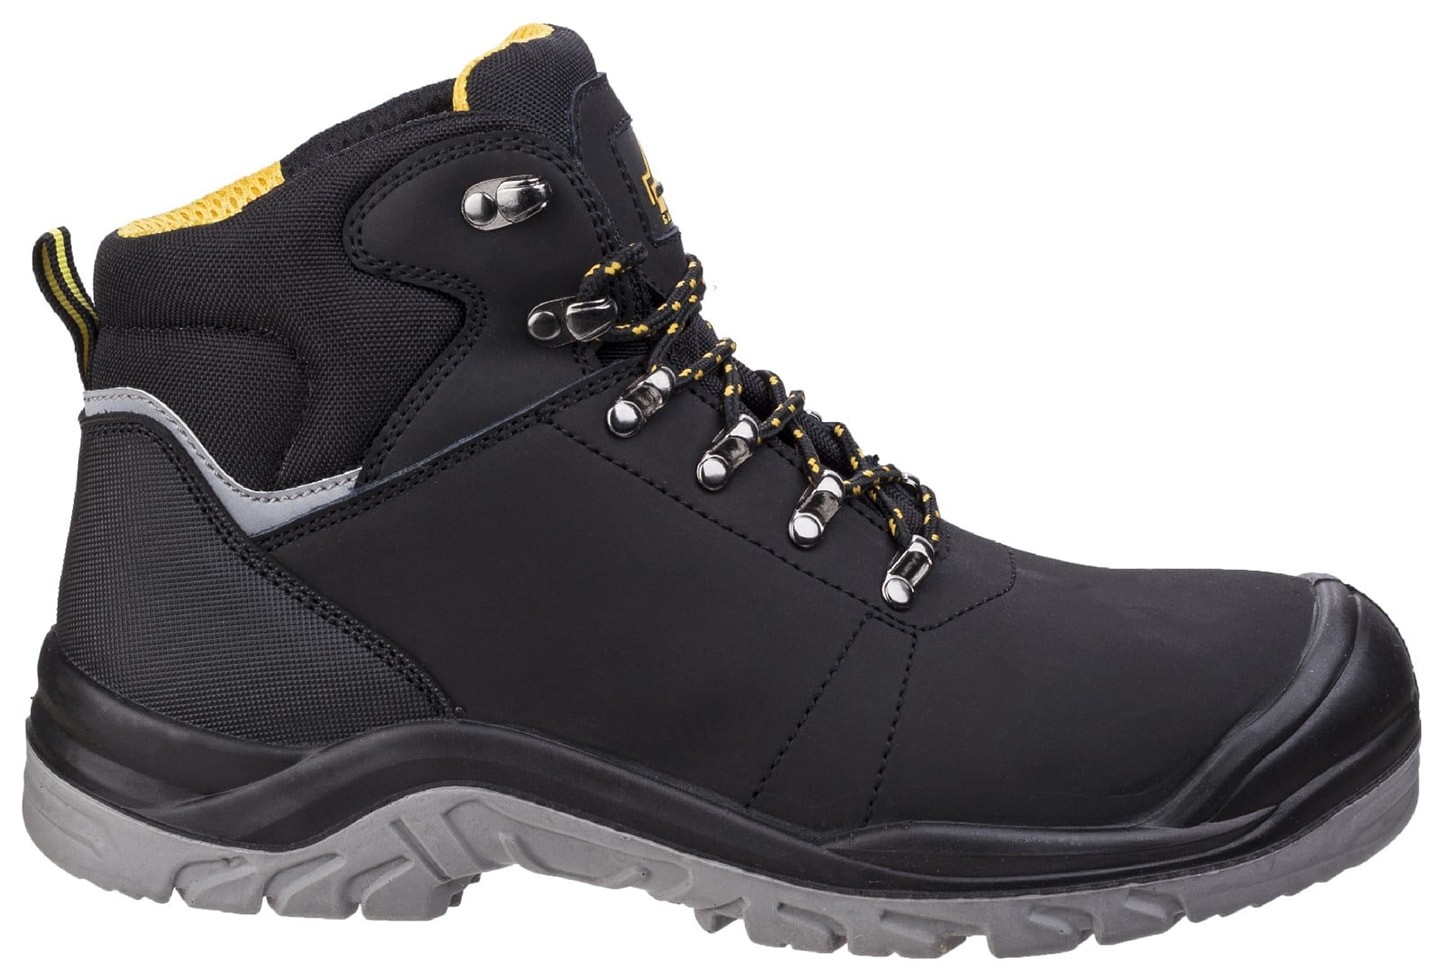 AS252 Lightweight Water Resistant Leather Safety Boot